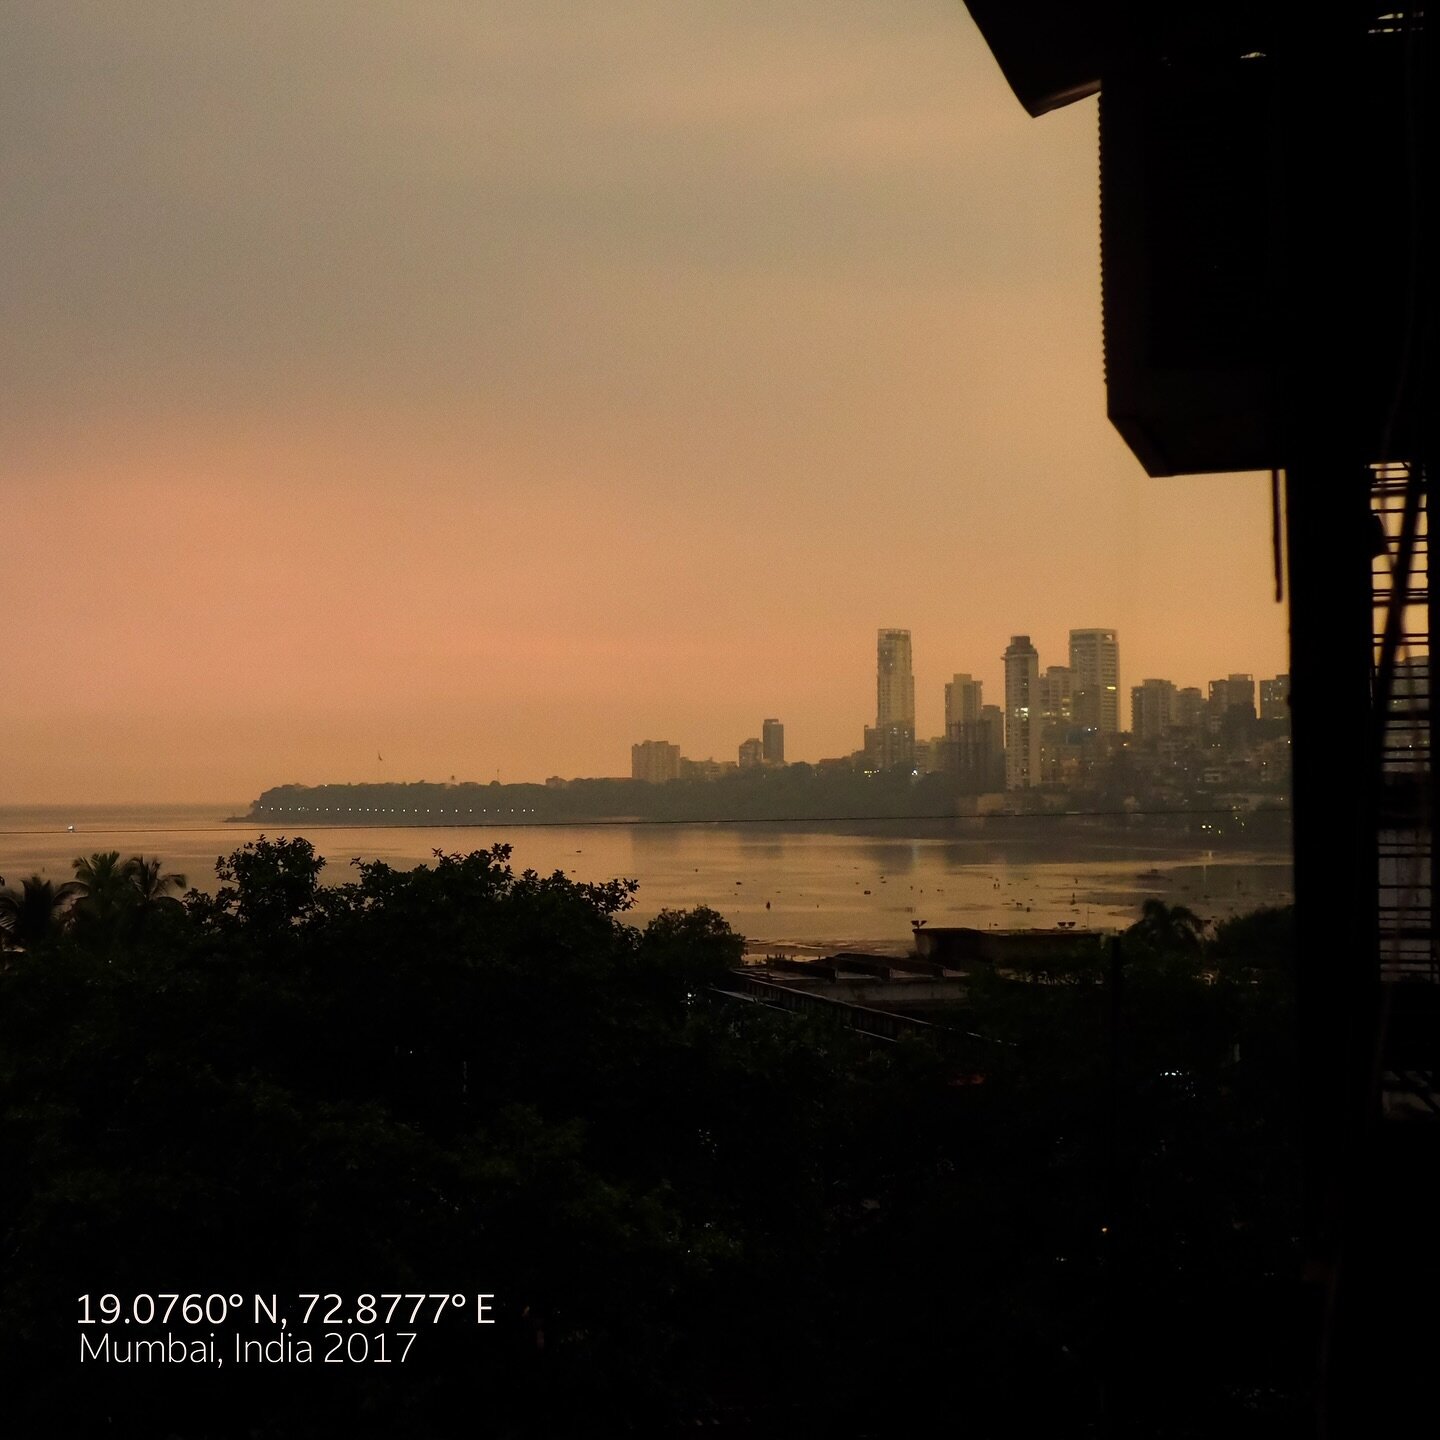 Sunset in Mumbai, India, 2017

On a film shoot in this enormous, intense metropolis a few years back, we were delighted to find fellow creatives to collaborate with and to learn how they translated their heritage and traditions into the zeitgeist.

F